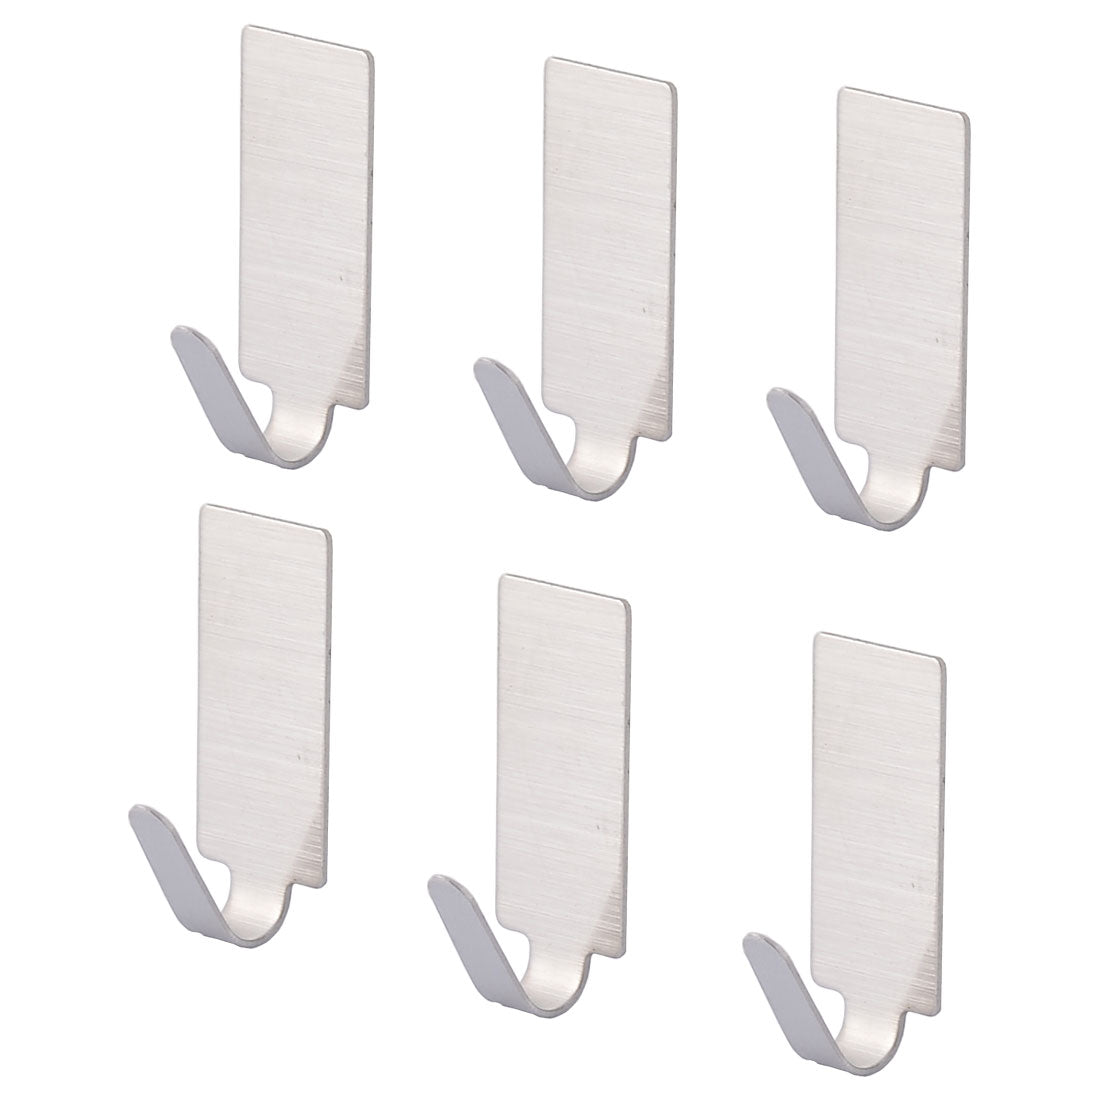 uxcell Uxcell Home Bathroom Bedroom Kitchen Stainless Steel Self Adhesive Wall Hooks Hanger 6pcs